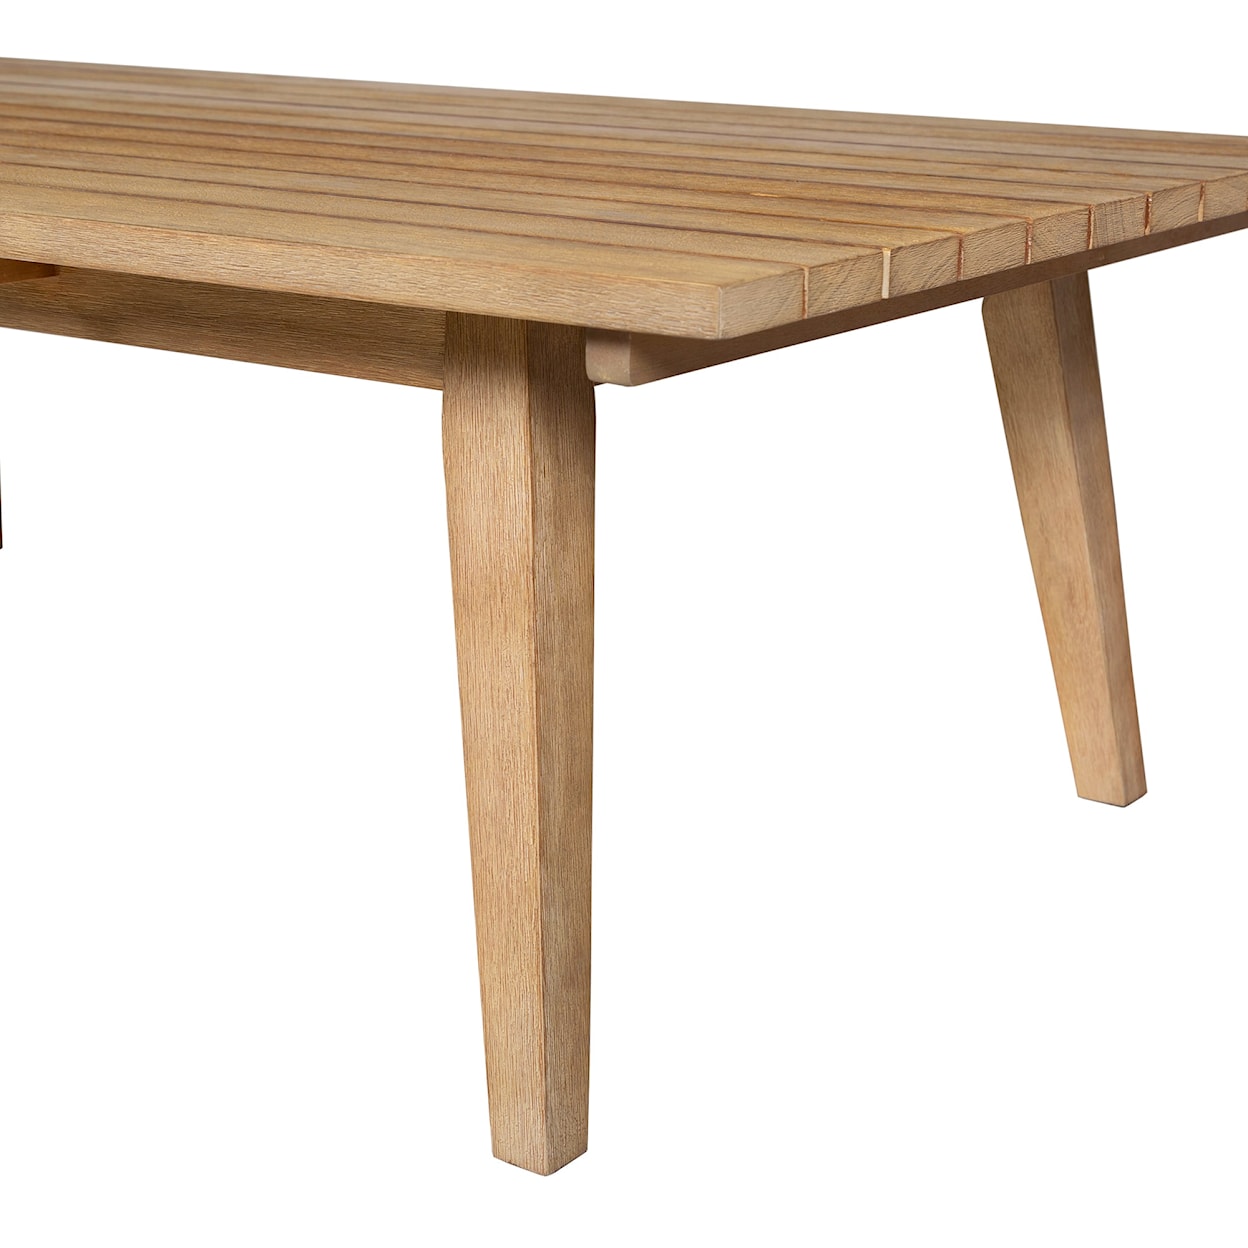 Armen Living Cypress Outdoor Coffee Table